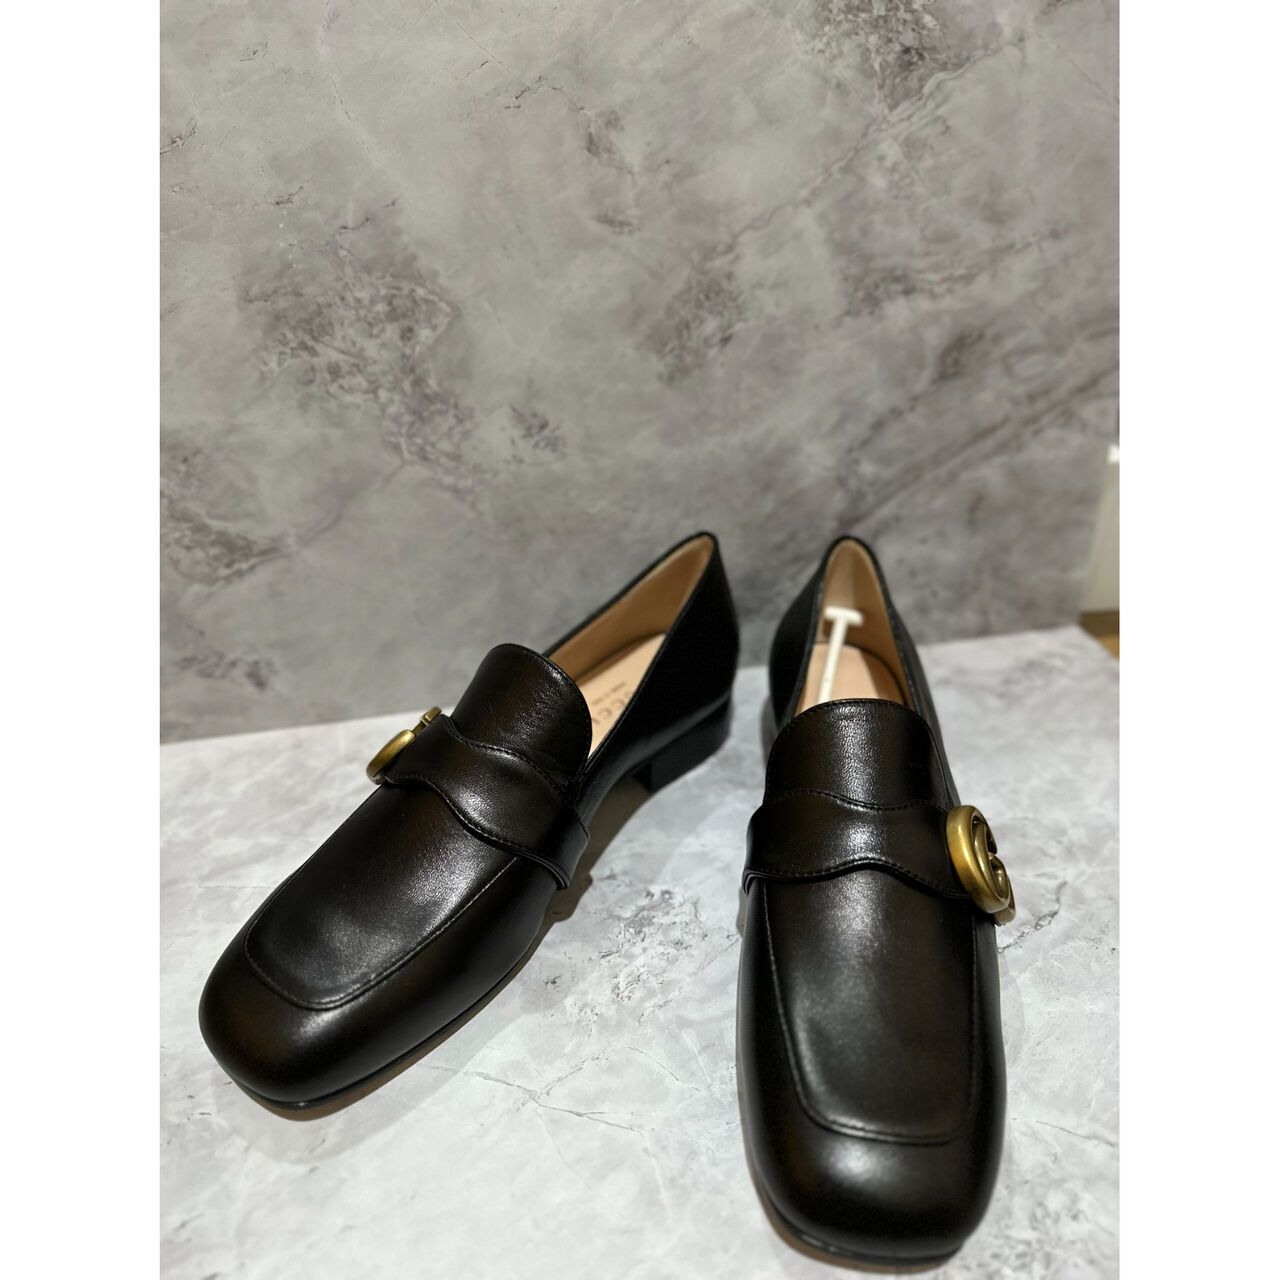 Gucci Malaga Kid Womens GG Marmont Loafers